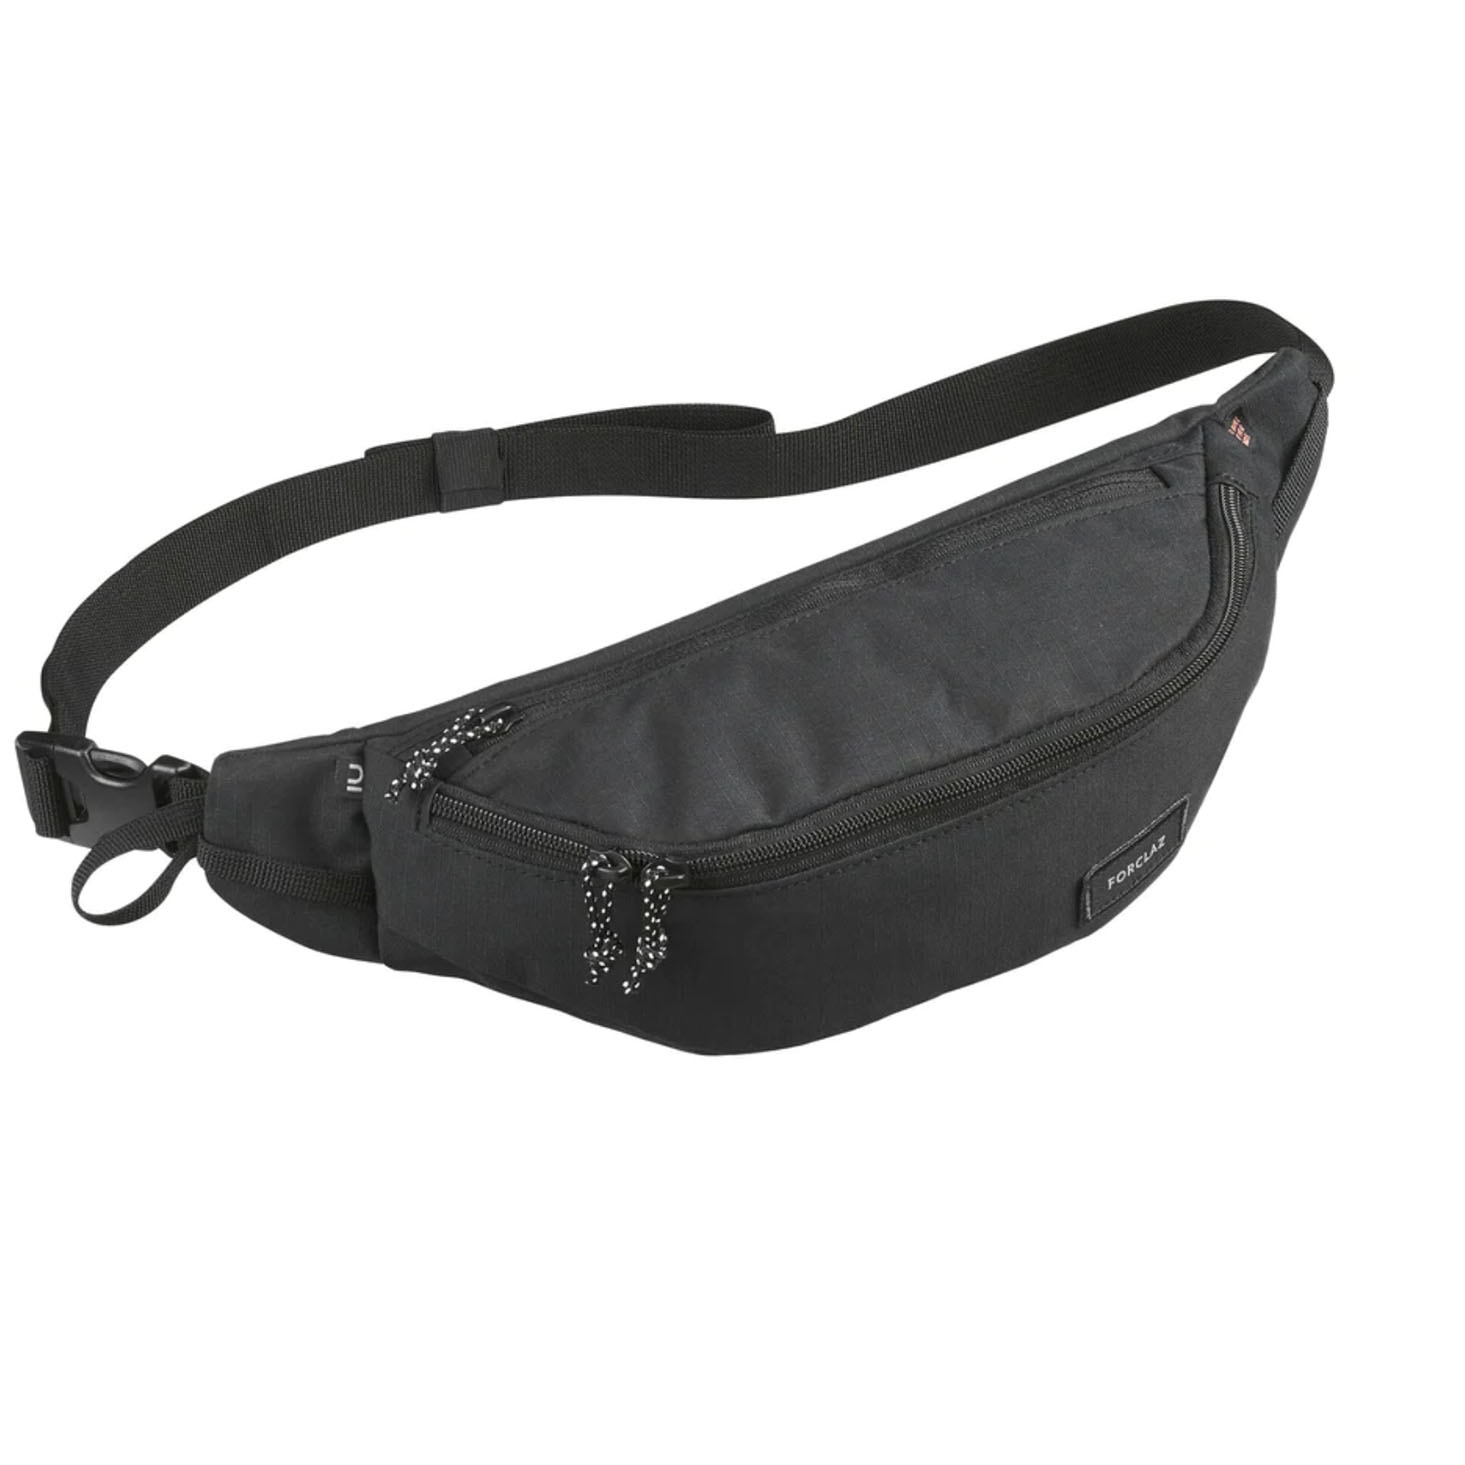 Black small fanny pack